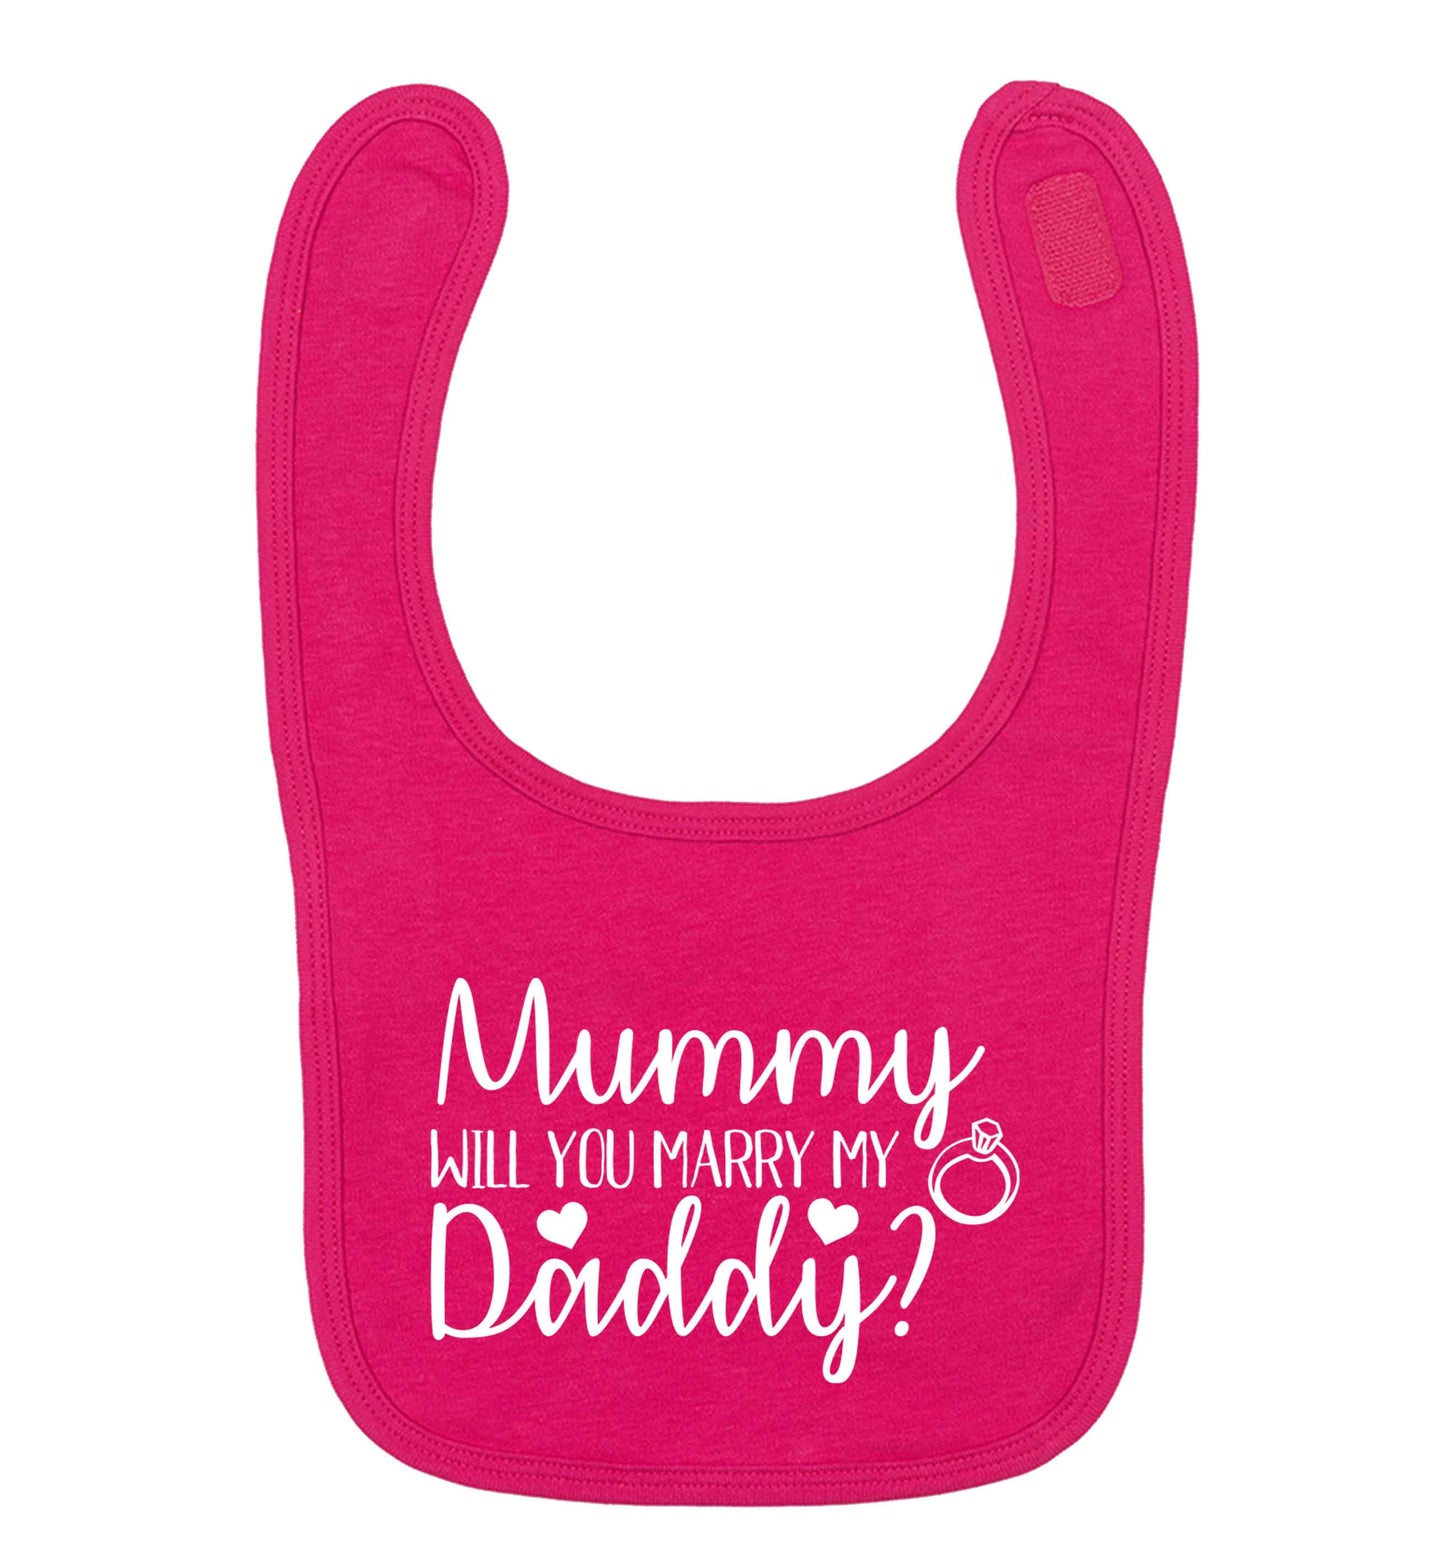 Looking for a unique way to pop the question? Why not let your kids do it!  dark pink baby bib